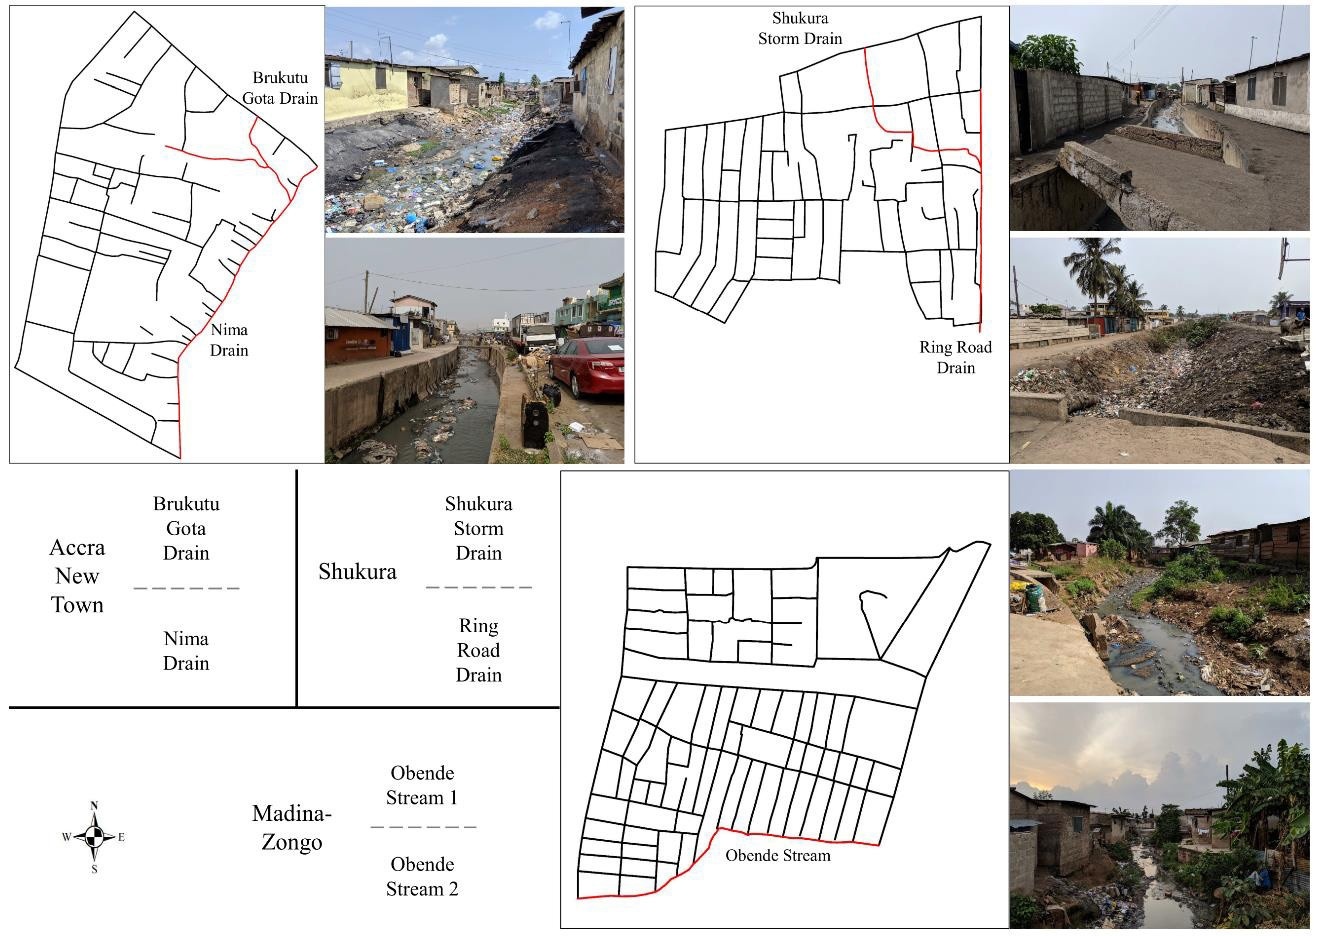 Compilation image of maps plus photos showing major drainage in Accra New Town, Shukura, and Madina-Zongo.